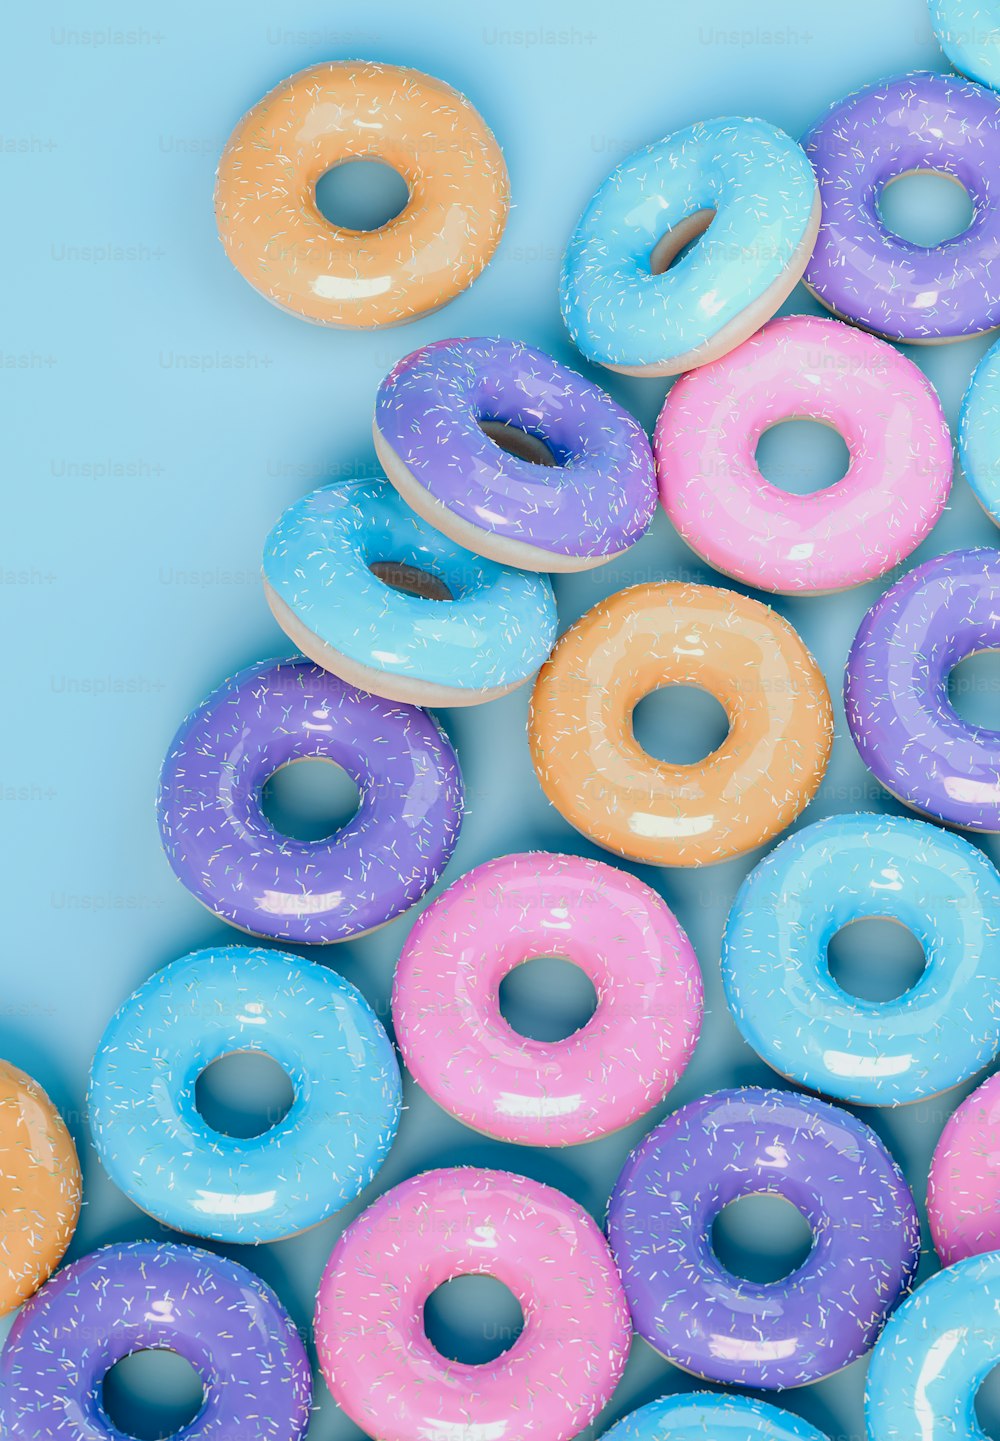 a pile of donuts with different colored frosting